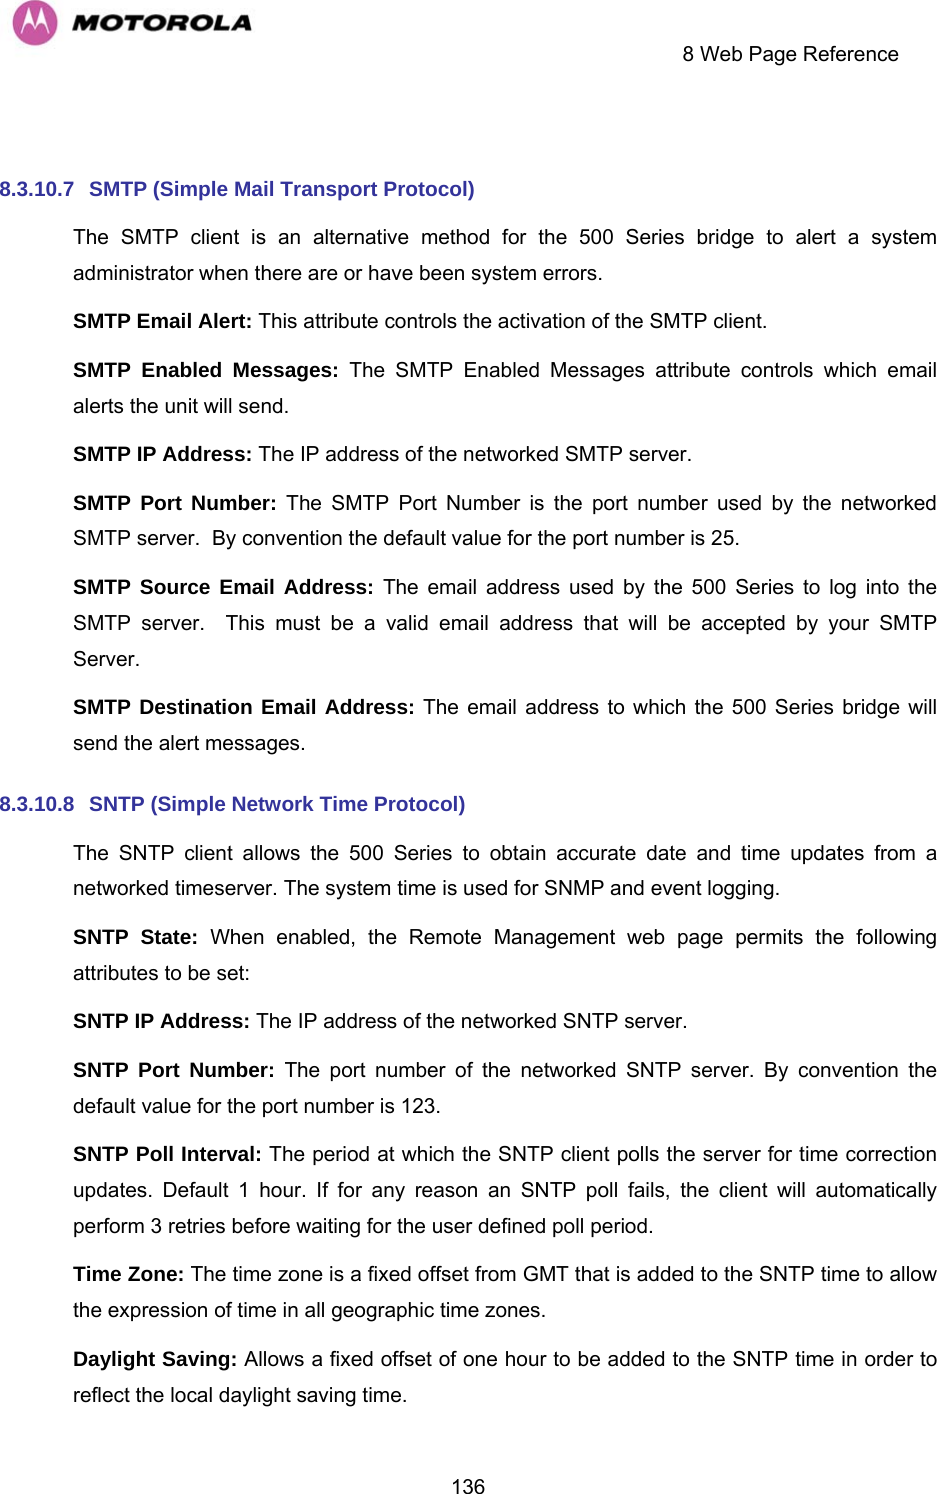     8 Web Page Reference  136 8.3.10.7  SMTP (Simple Mail Transport Protocol) The SMTP client is an alternative method for the 500 Series bridge to alert a system administrator when there are or have been system errors. SMTP Email Alert: This attribute controls the activation of the SMTP client. SMTP Enabled Messages: The SMTP Enabled Messages attribute controls which email alerts the unit will send. SMTP IP Address: The IP address of the networked SMTP server. SMTP Port Number: The SMTP Port Number is the port number used by the networked SMTP server.  By convention the default value for the port number is 25. SMTP Source Email Address: The email address used by the 500 Series to log into the SMTP server.  This must be a valid email address that will be accepted by your SMTP Server. SMTP Destination Email Address: The email address to which the 500 Series bridge will send the alert messages. 8.3.10.8  SNTP (Simple Network Time Protocol) The SNTP client allows the 500 Series to obtain accurate date and time updates from a networked timeserver. The system time is used for SNMP and event logging. SNTP State: When enabled, the Remote Management web page permits the following attributes to be set: SNTP IP Address: The IP address of the networked SNTP server. SNTP Port Number: The port number of the networked SNTP server. By convention the default value for the port number is 123. SNTP Poll Interval: The period at which the SNTP client polls the server for time correction updates. Default 1 hour. If for any reason an SNTP poll fails, the client will automatically perform 3 retries before waiting for the user defined poll period. Time Zone: The time zone is a fixed offset from GMT that is added to the SNTP time to allow the expression of time in all geographic time zones. Daylight Saving: Allows a fixed offset of one hour to be added to the SNTP time in order to reflect the local daylight saving time. 